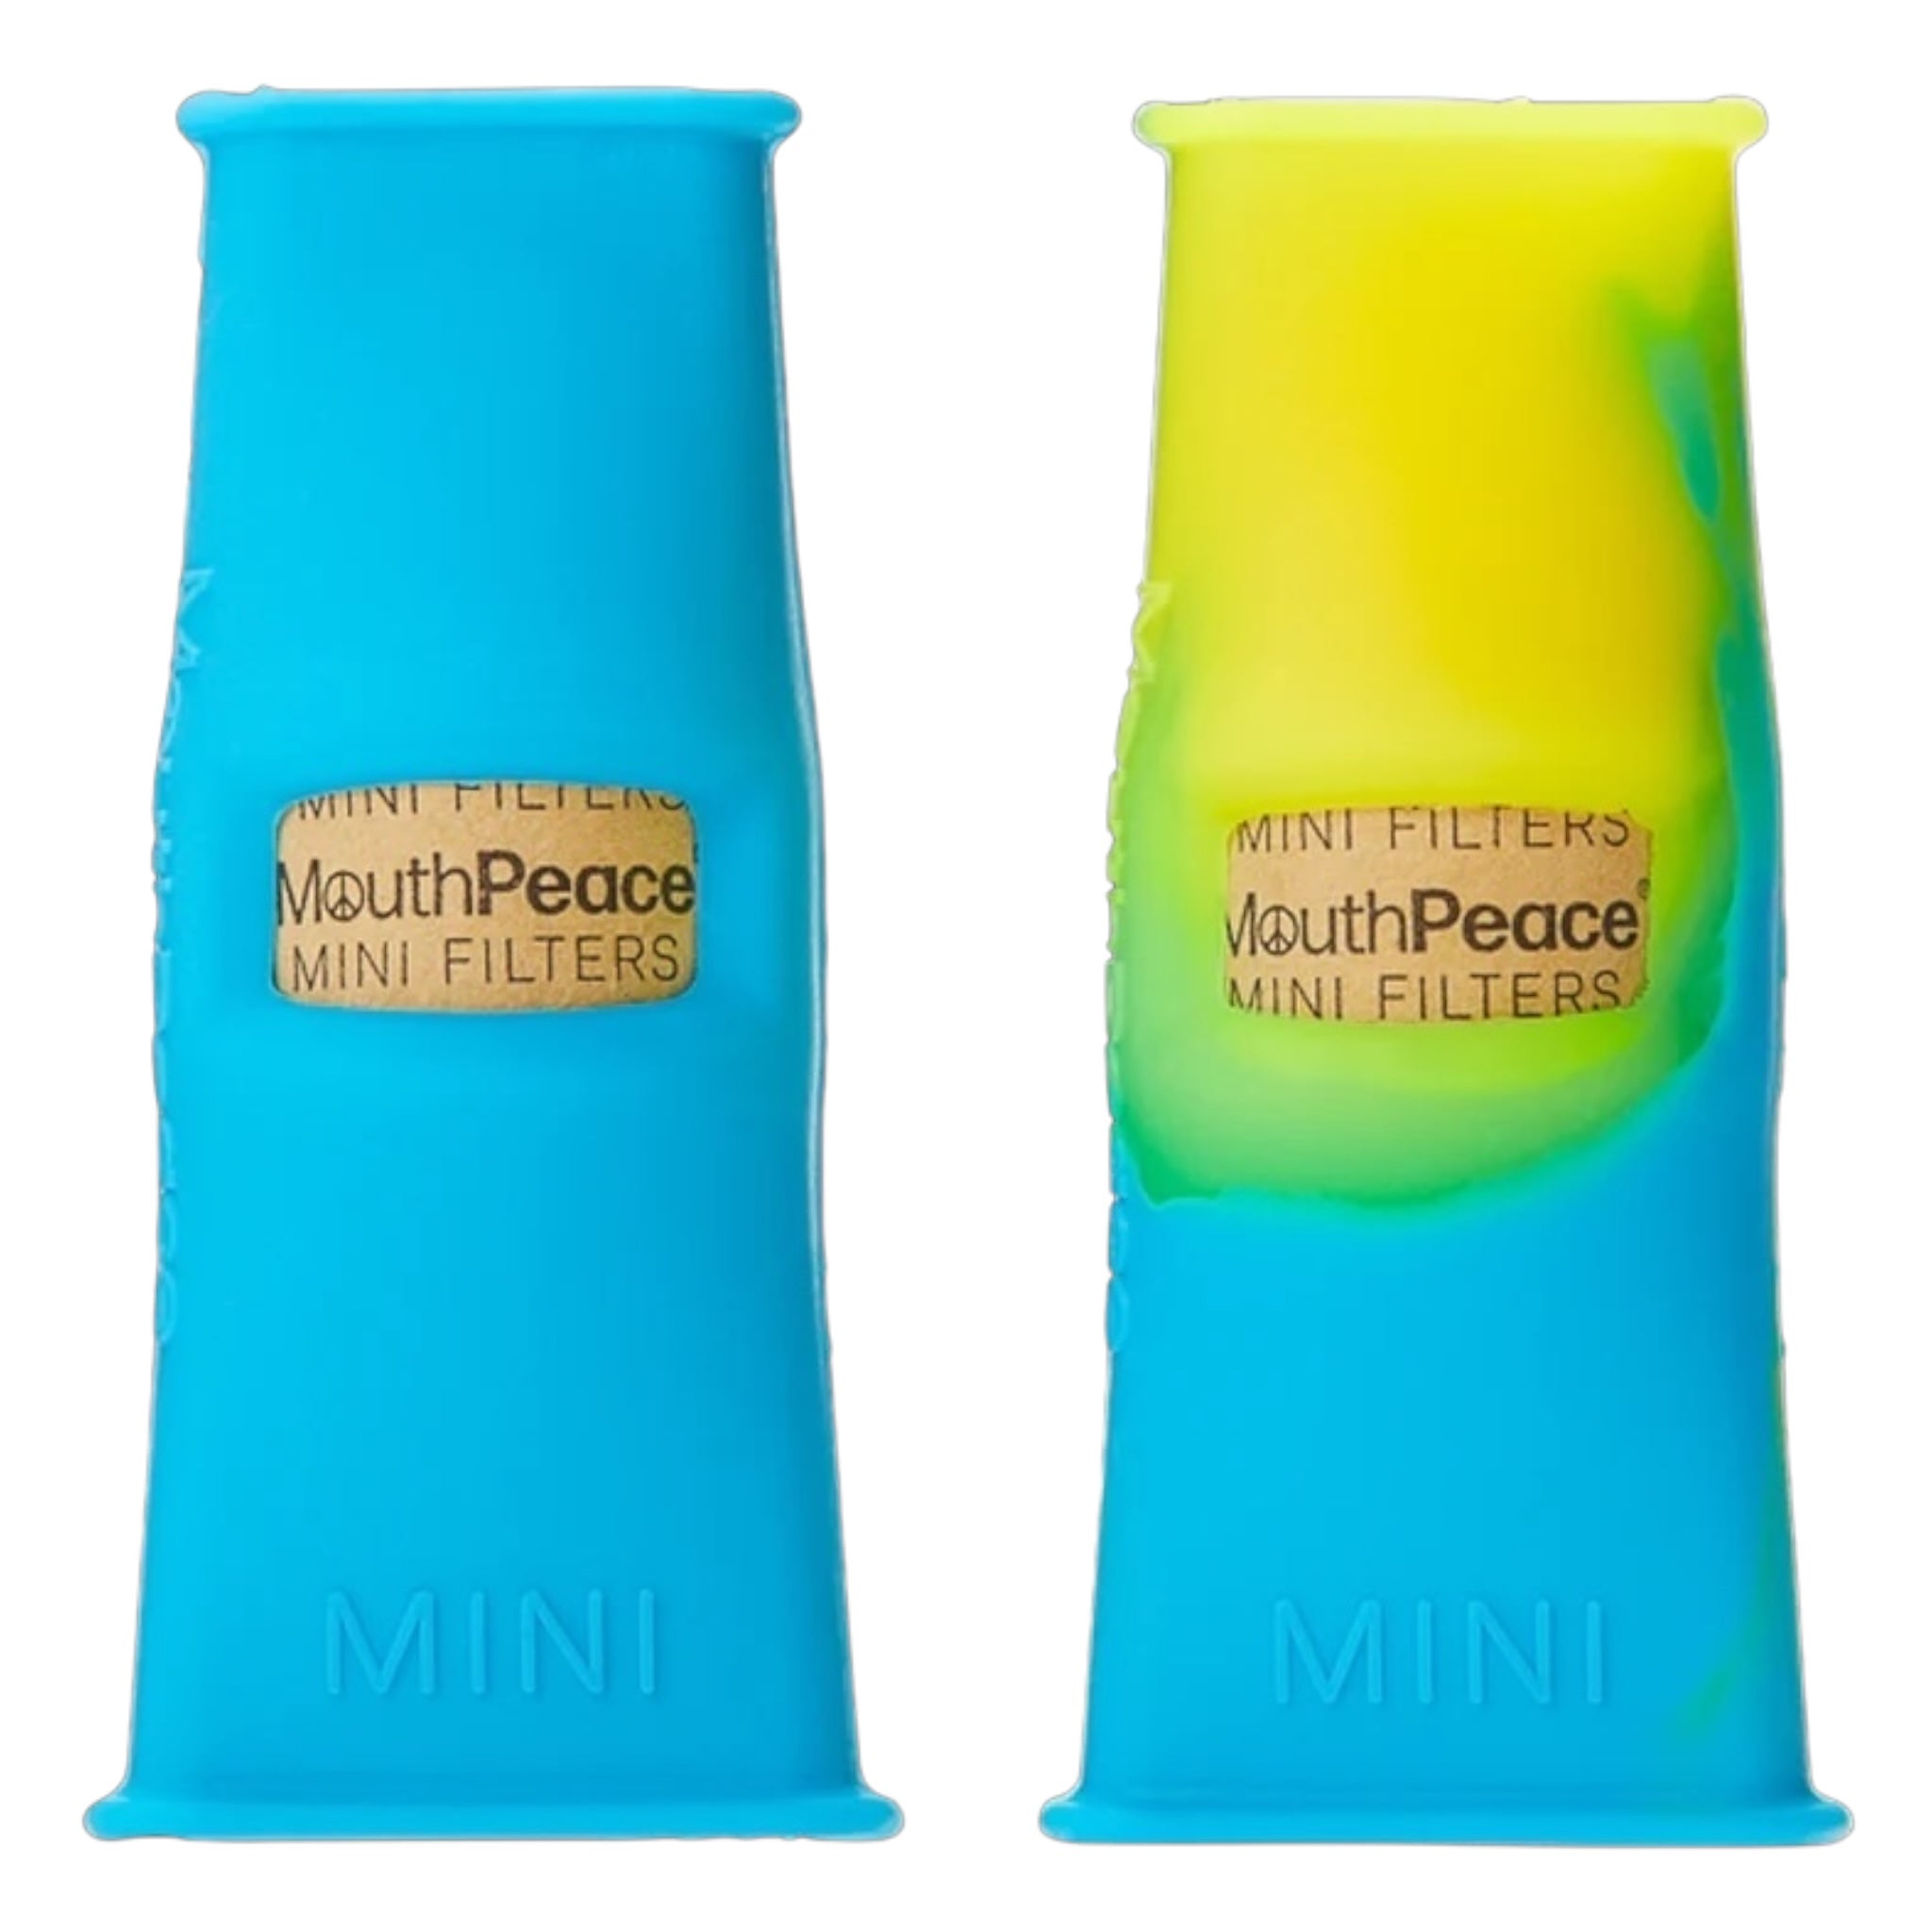 Moose Labs MouthPeace Mini + Filter Rolls - 2 Pack